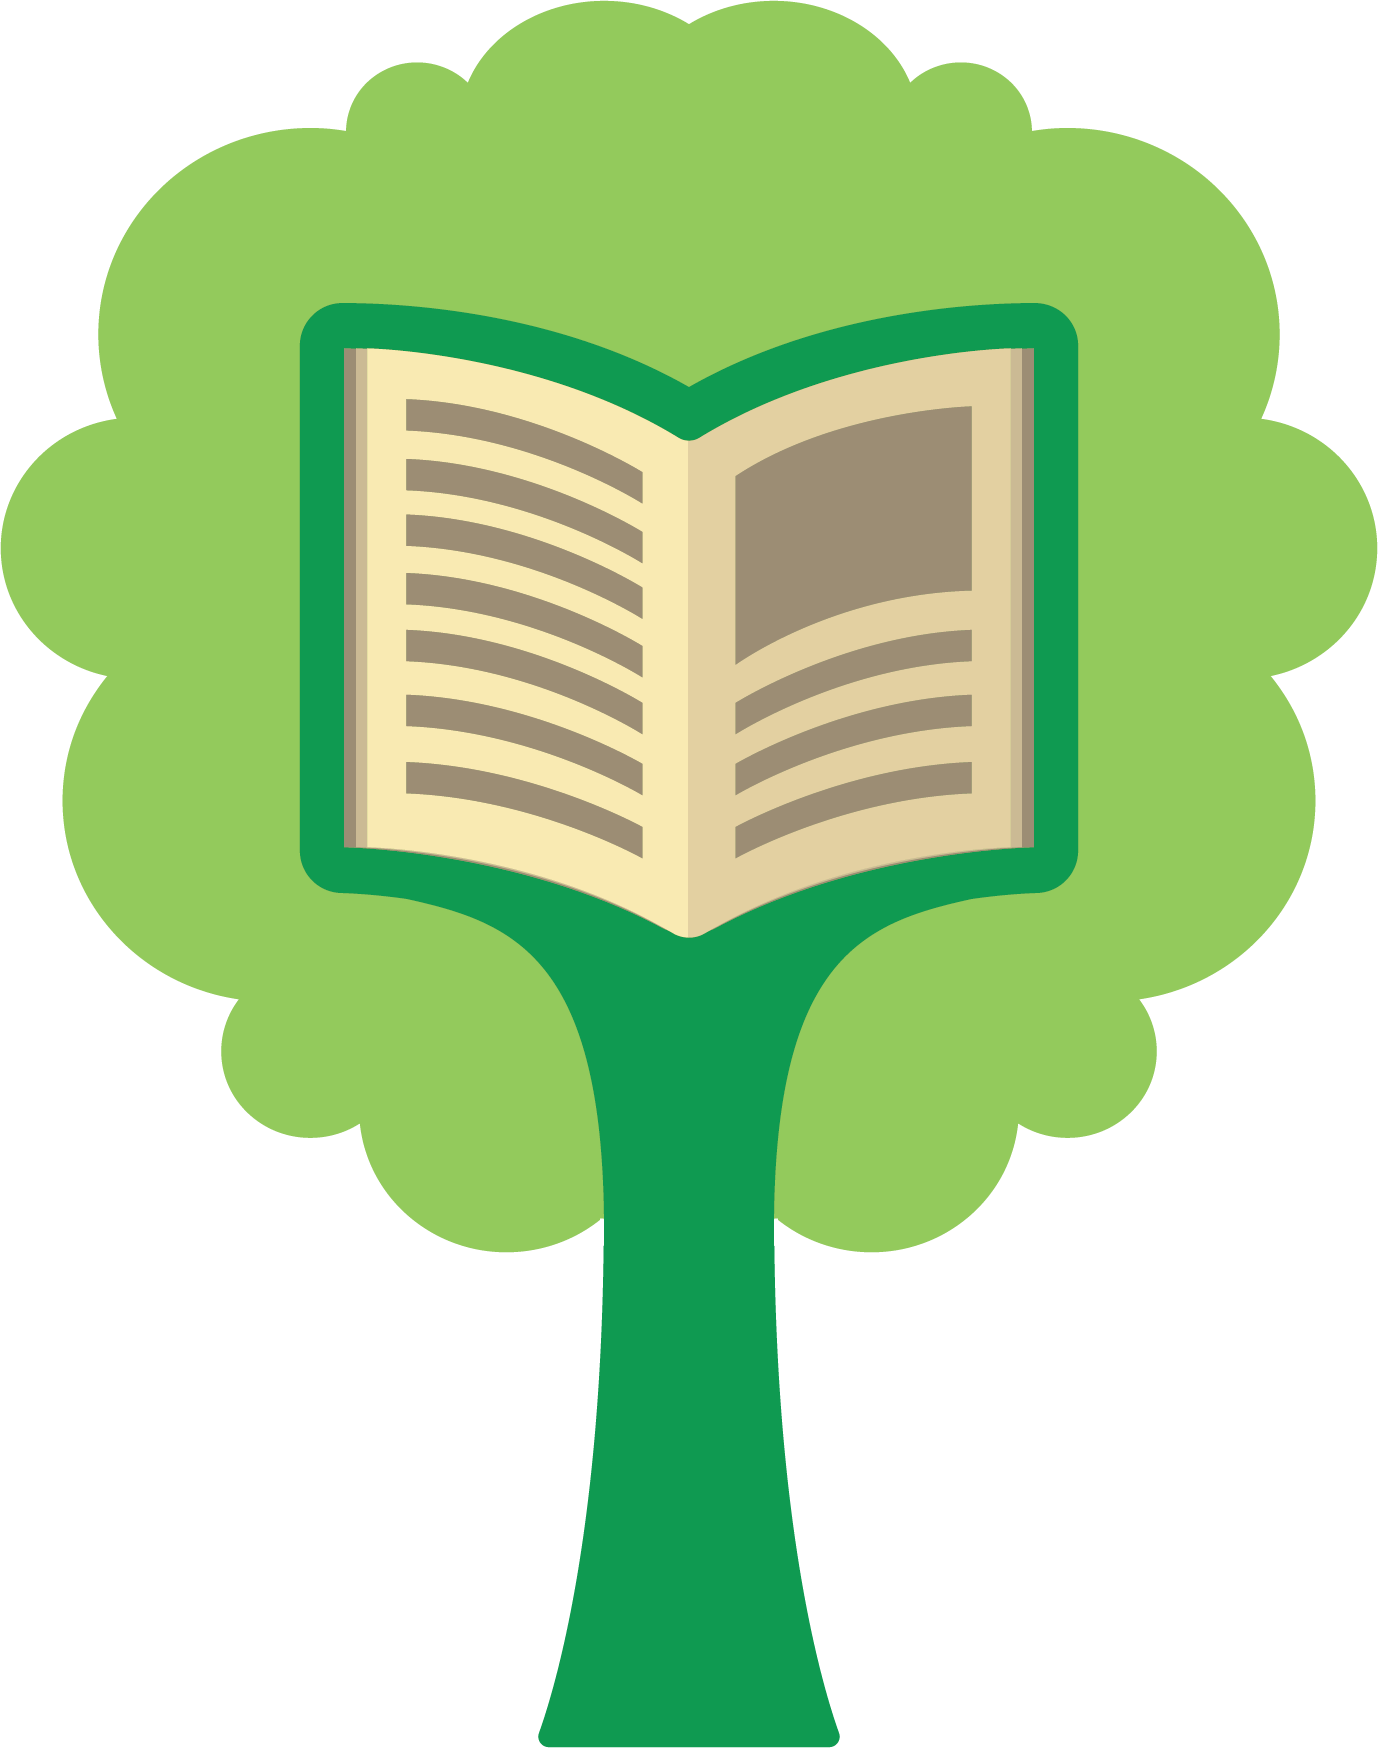 A green animated tree icon. There is a book in the center of the tree branches and it is open.